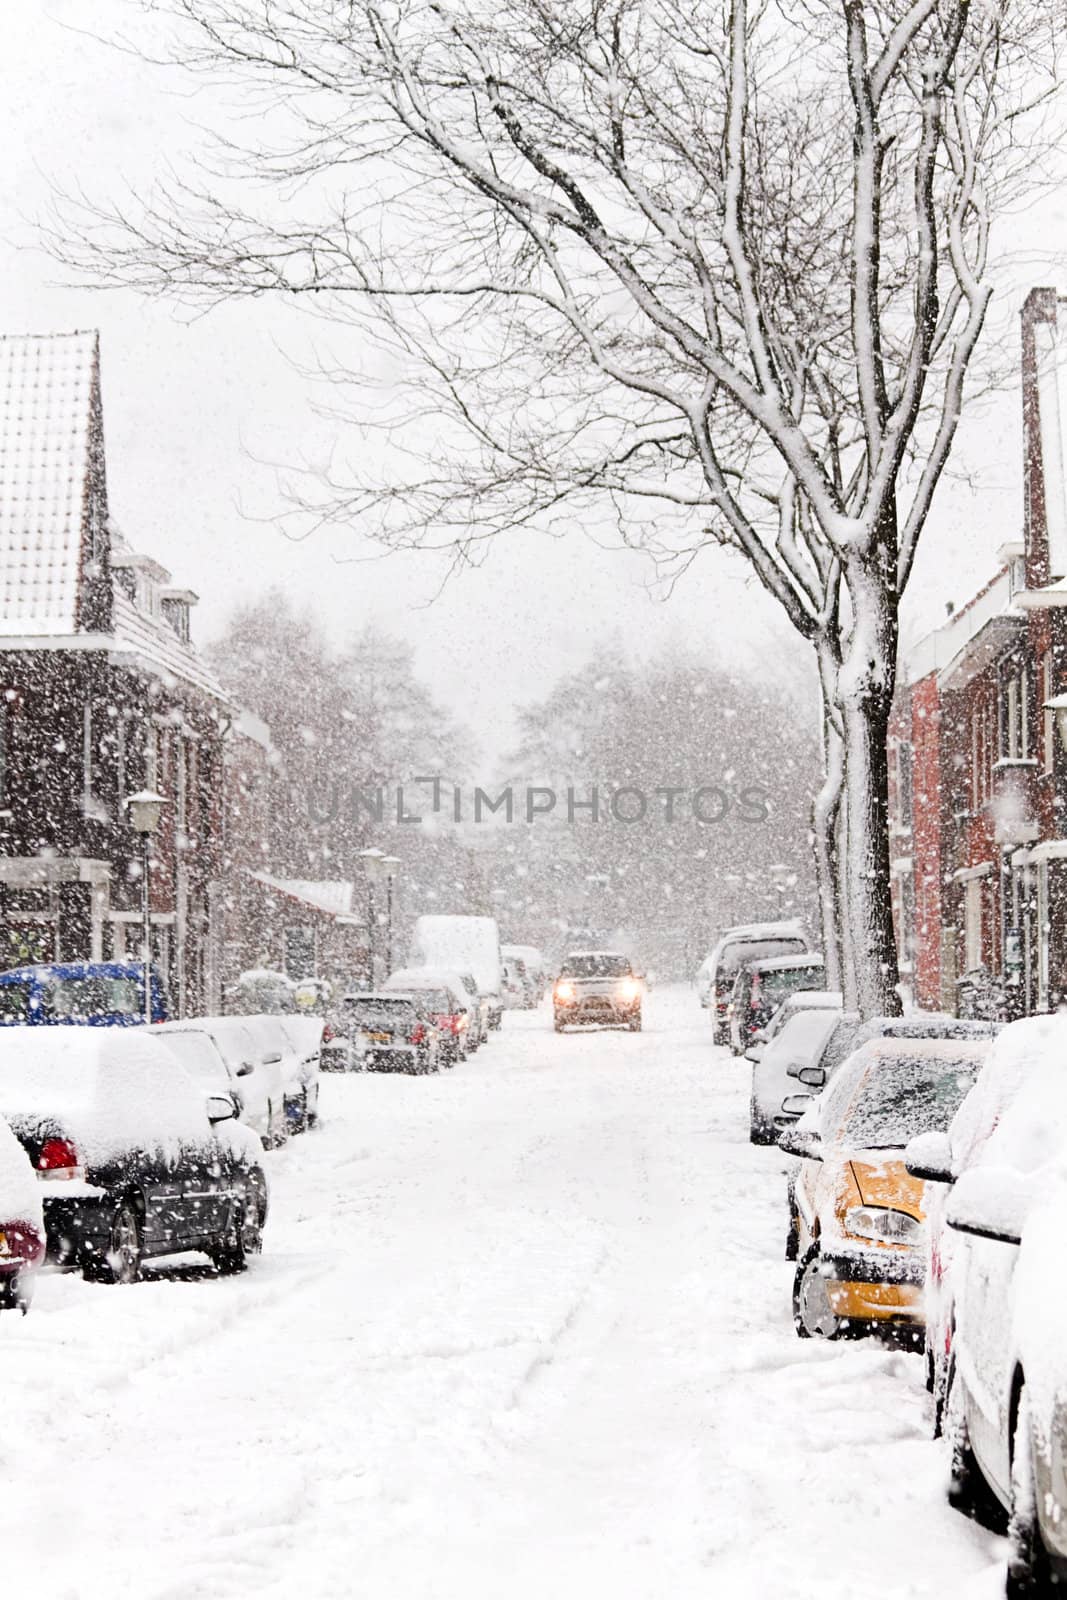 Snow in the city - Snowstorm streetview by Colette